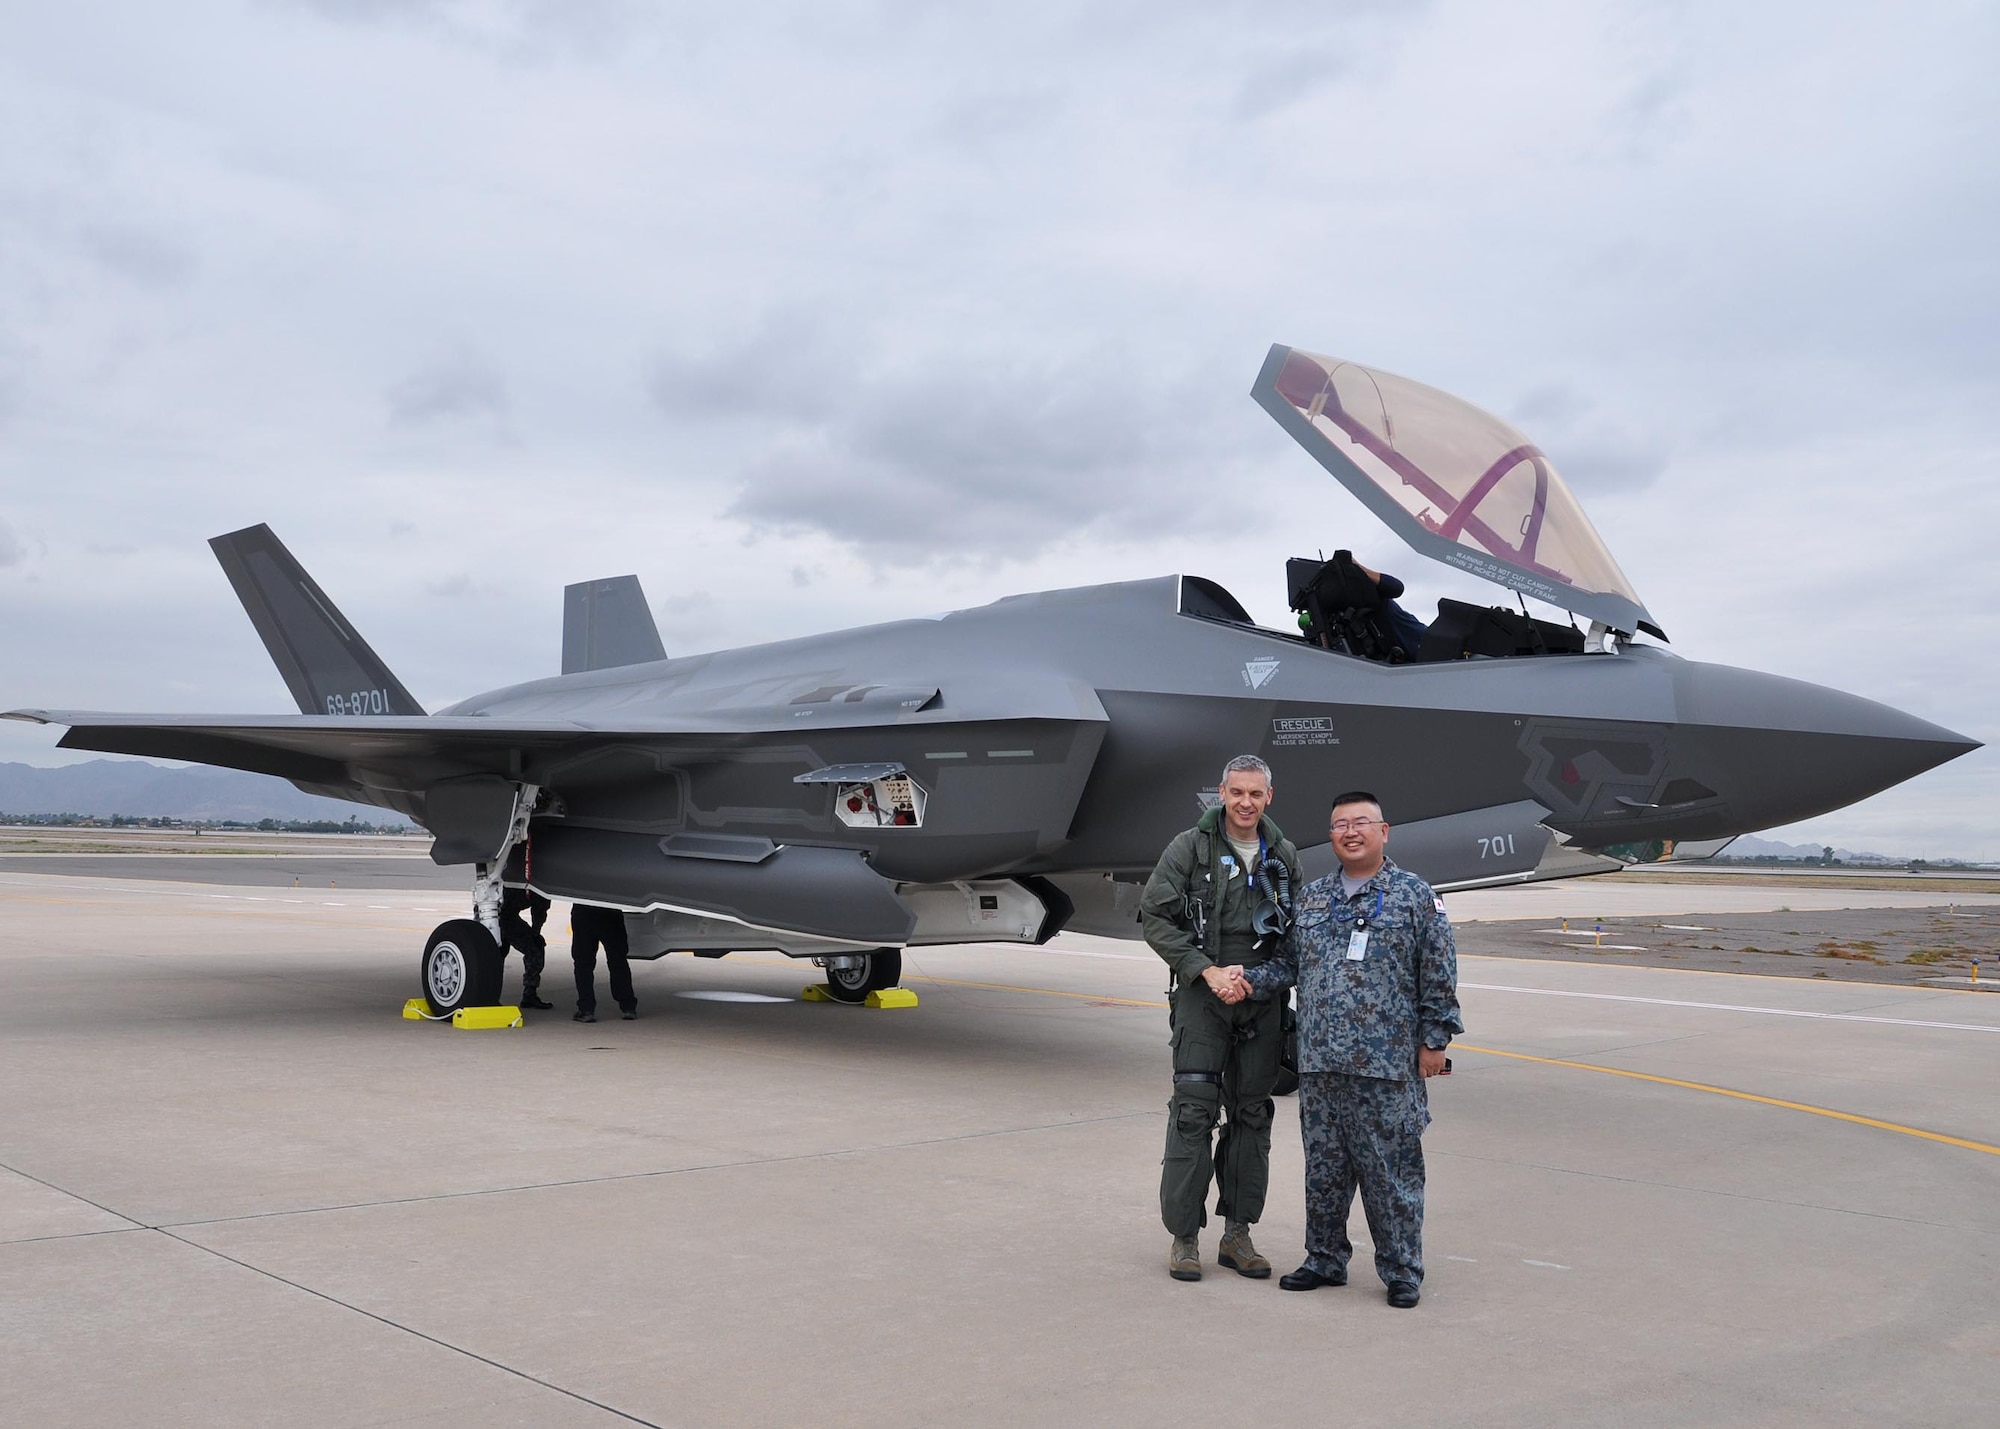 Maj. Toru Tsuchiya, Japan Air Self-Defense Force, Japanese F-35A foreign liaison officer and Lt. Col. Todd Lafortune, Defense Contract Management Agency Lockheed Martin, F-35 acceptance pilot, shake hands Nov. 28 during the arrival of the first Foreign Military Sales F-35 at Luke Air Force Base, Ariz. (U.S. Air Force photo by Tech. Sgt. Louis Vega Jr.)